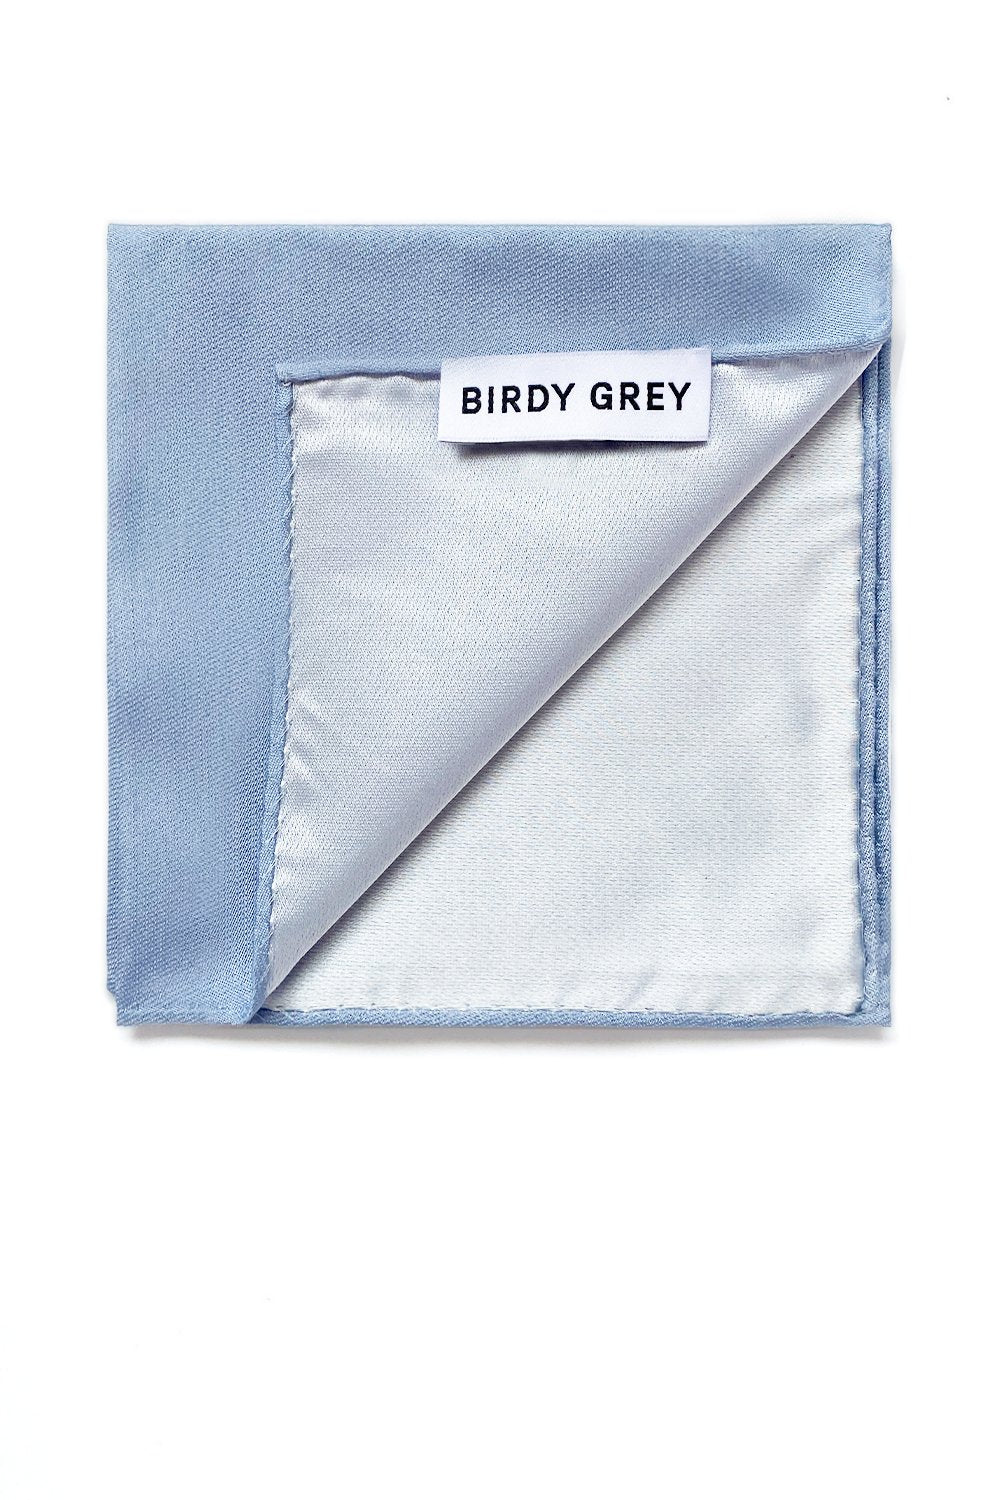 Didi Pocket Square in dusty blue by Birdy Grey, interior view